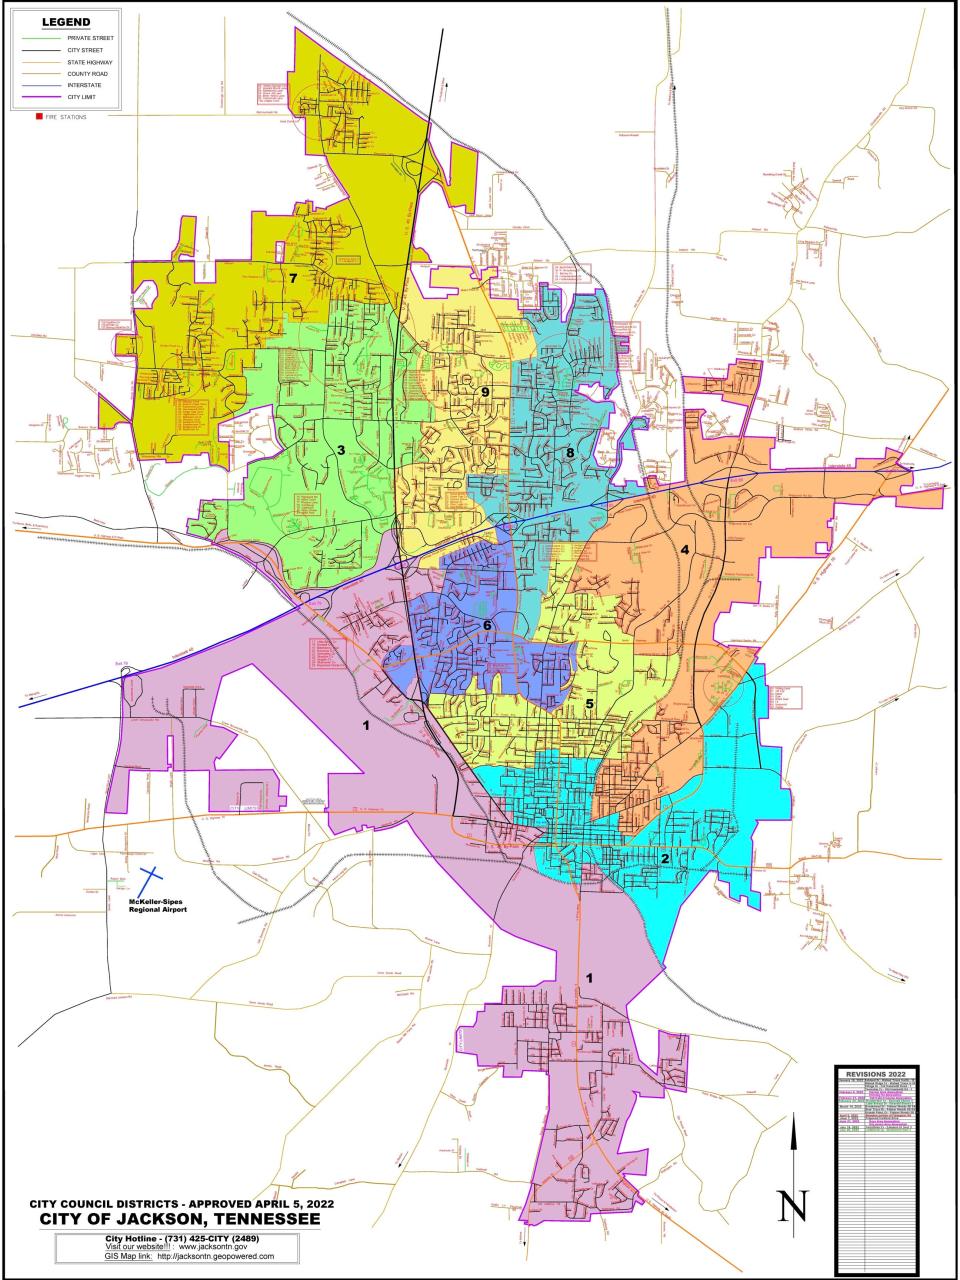 Approved in early April of 2022, the newly redistricted map of Jackson outlines the new confines of each city council district.